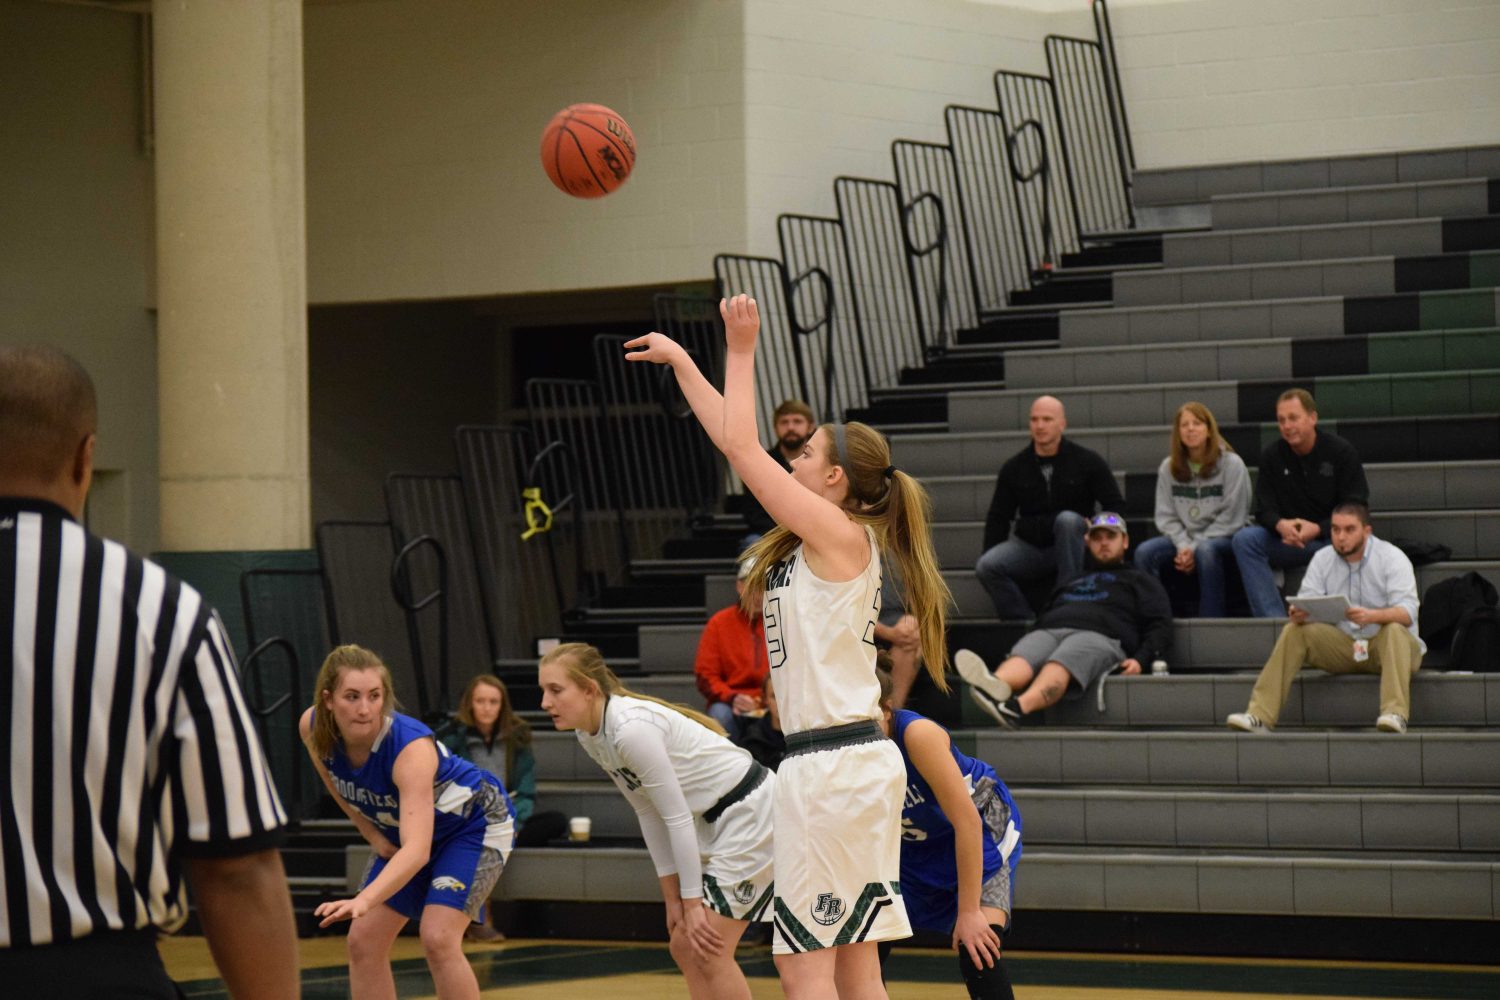 Brit Mishak drains 2/2 on her free throws. Photo Credit: Jessica Rockwell